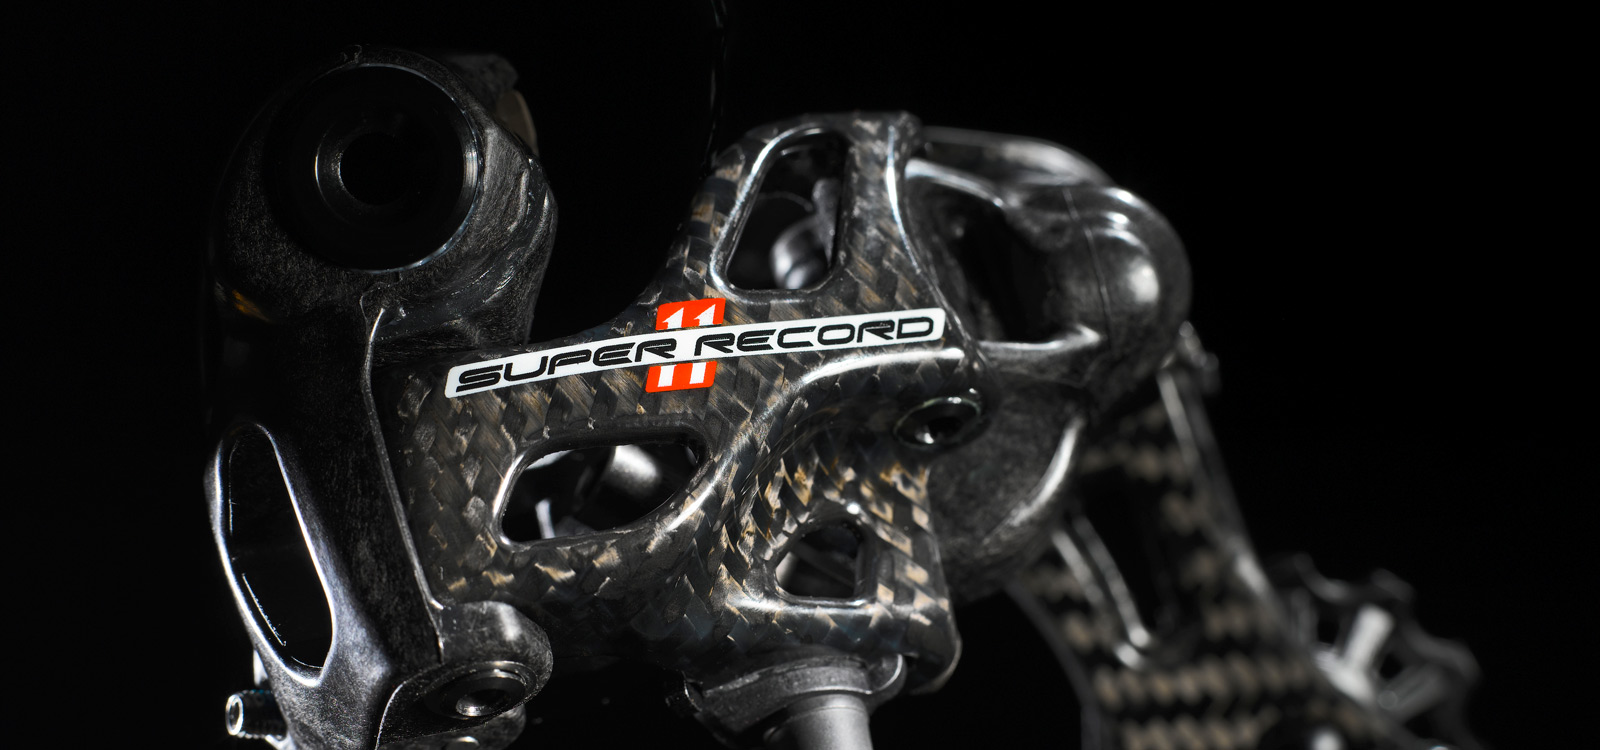 2219_z_campagnolo-super-record-groupset-main2-2015